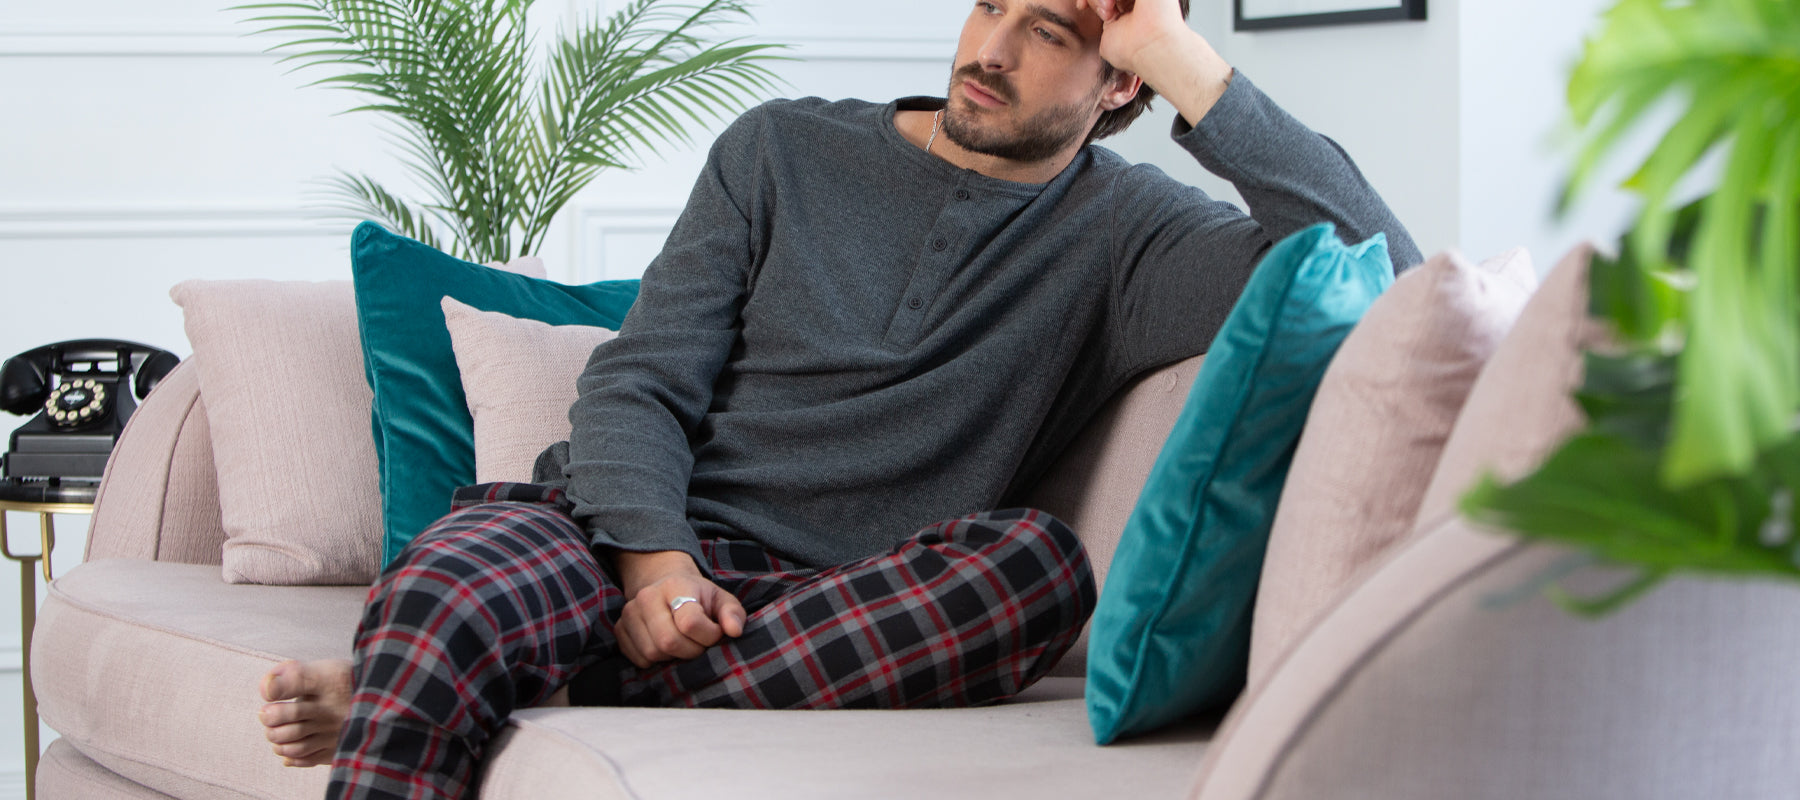 Shop our men's sleepwear collection from plaid pajama pants and henley tops